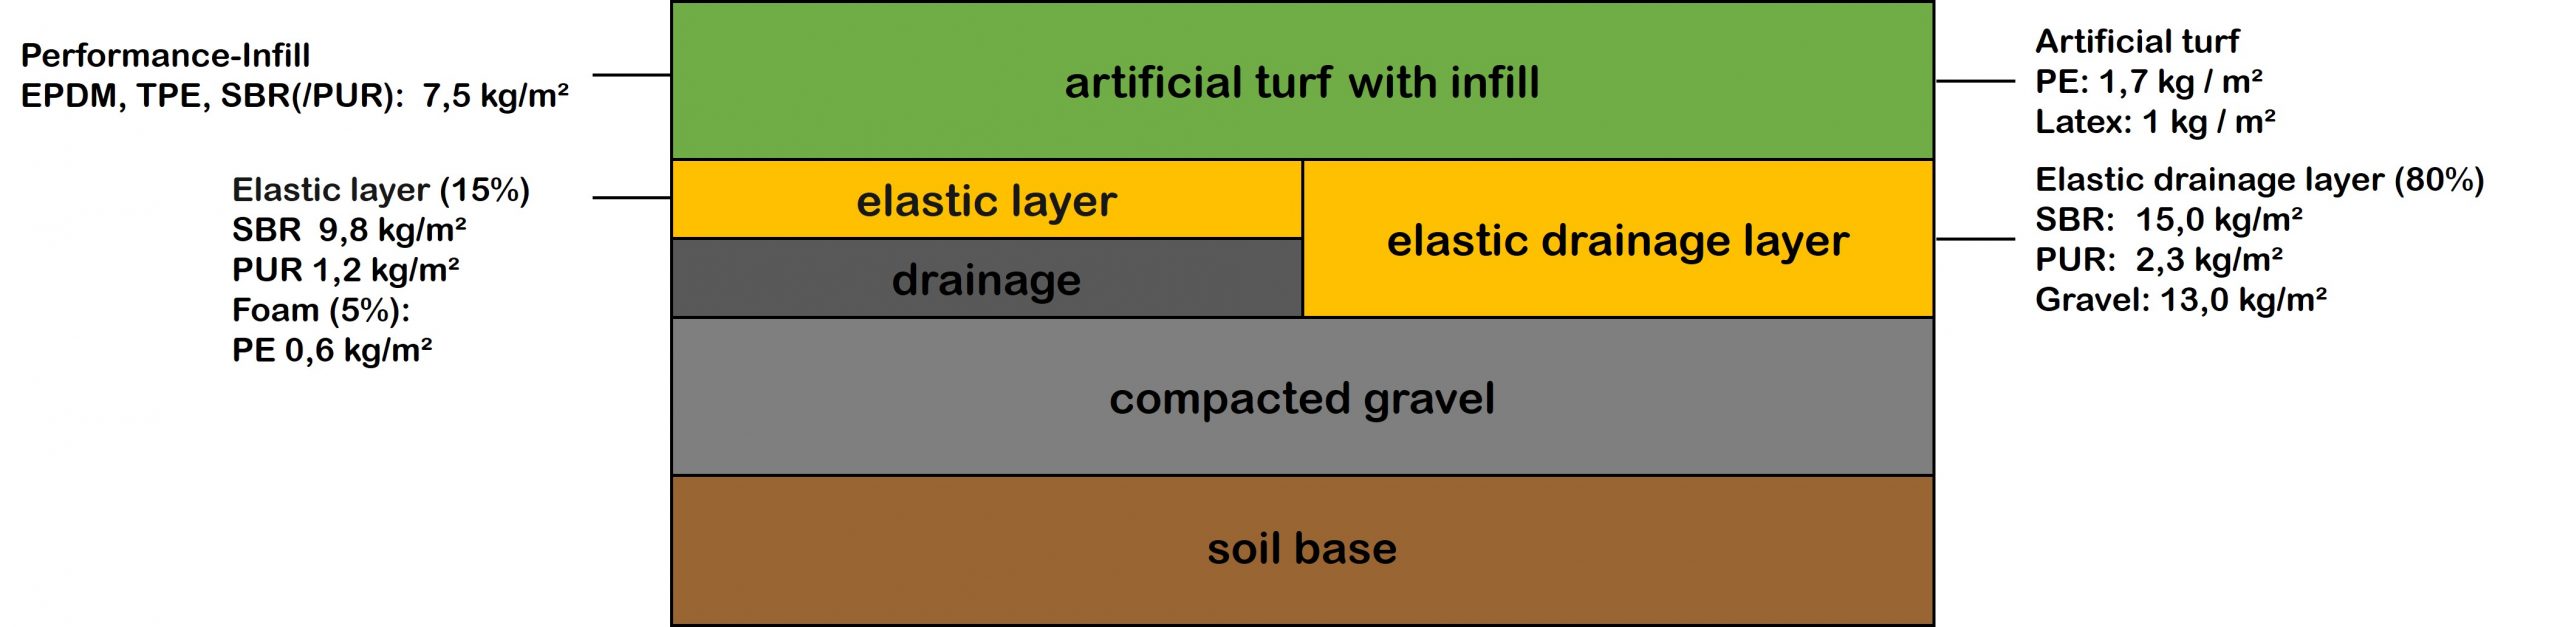 Structure of the artificial turf Artificial turf pitches consist of various layers and an infill. An unbound base layer including a drainage system (to drain off rain and backwater) is applied to the subsoil to level the ground and provide cushioning. On top of this, an elastic bearing layer is applied, usually consisting of used tire granulate with a polyurethane-based binder. An alternative to this is an asphalt layer with an applied elastic layer, also consisting of used tyre granulate and binder. This layer simulates the spring comfort of natural grass.